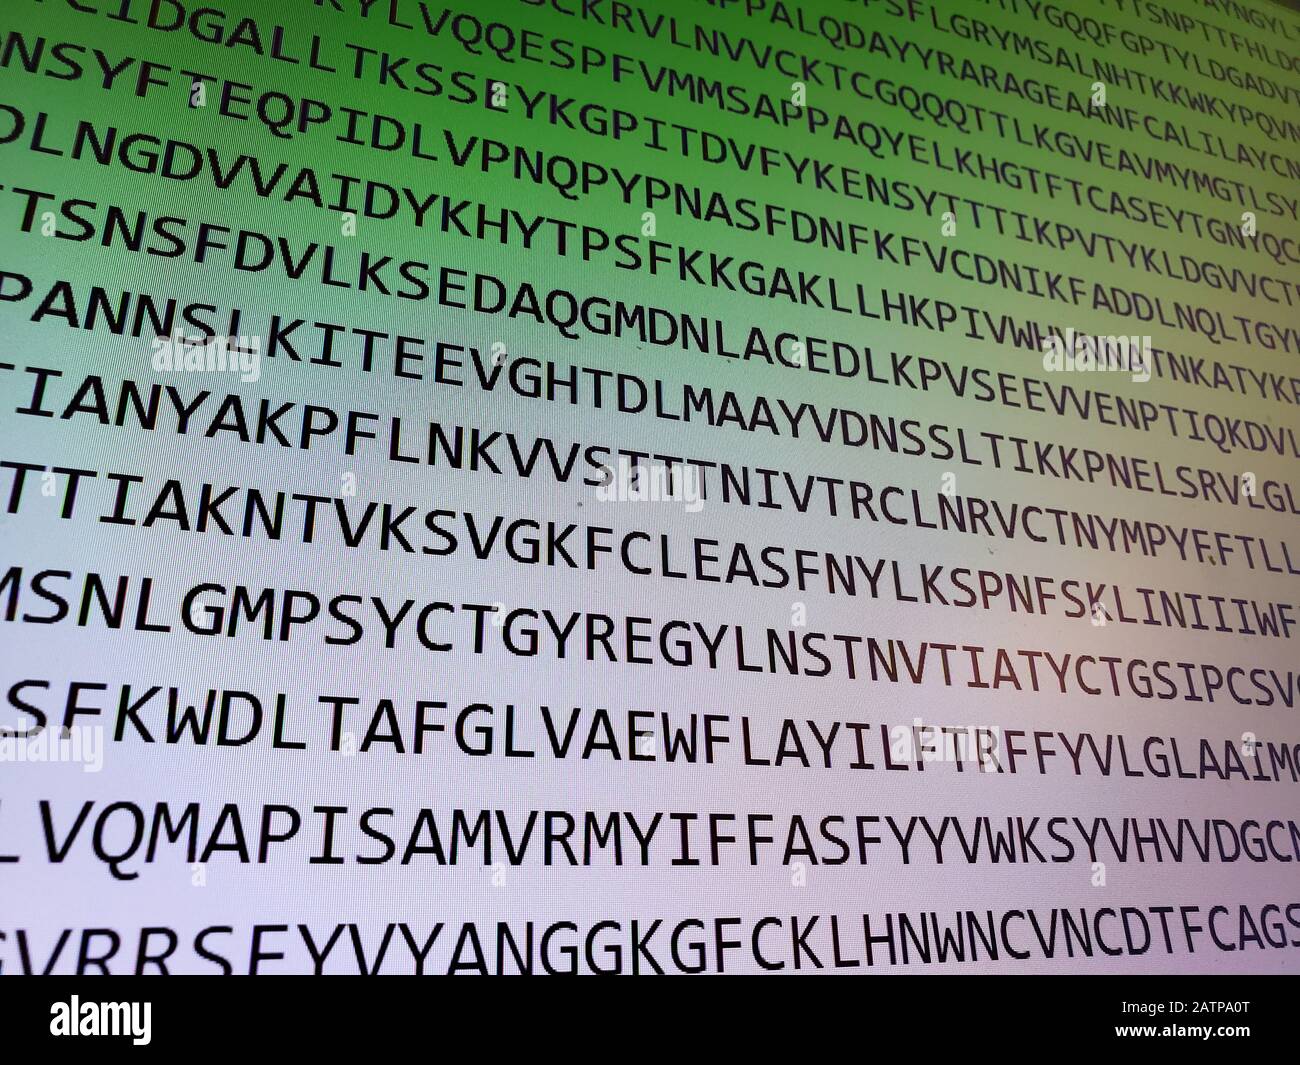 Close-up of letters displaying a portion of the genetic sequence of the novel Coronavirus which infected people beginning in Wuhan, China in 2020, on a computer screen, San Ramon, California, January 29, 2020. The release of the genetic sequence of the virus is a key step towards developing vaccines and other treatments. () Stock Photo